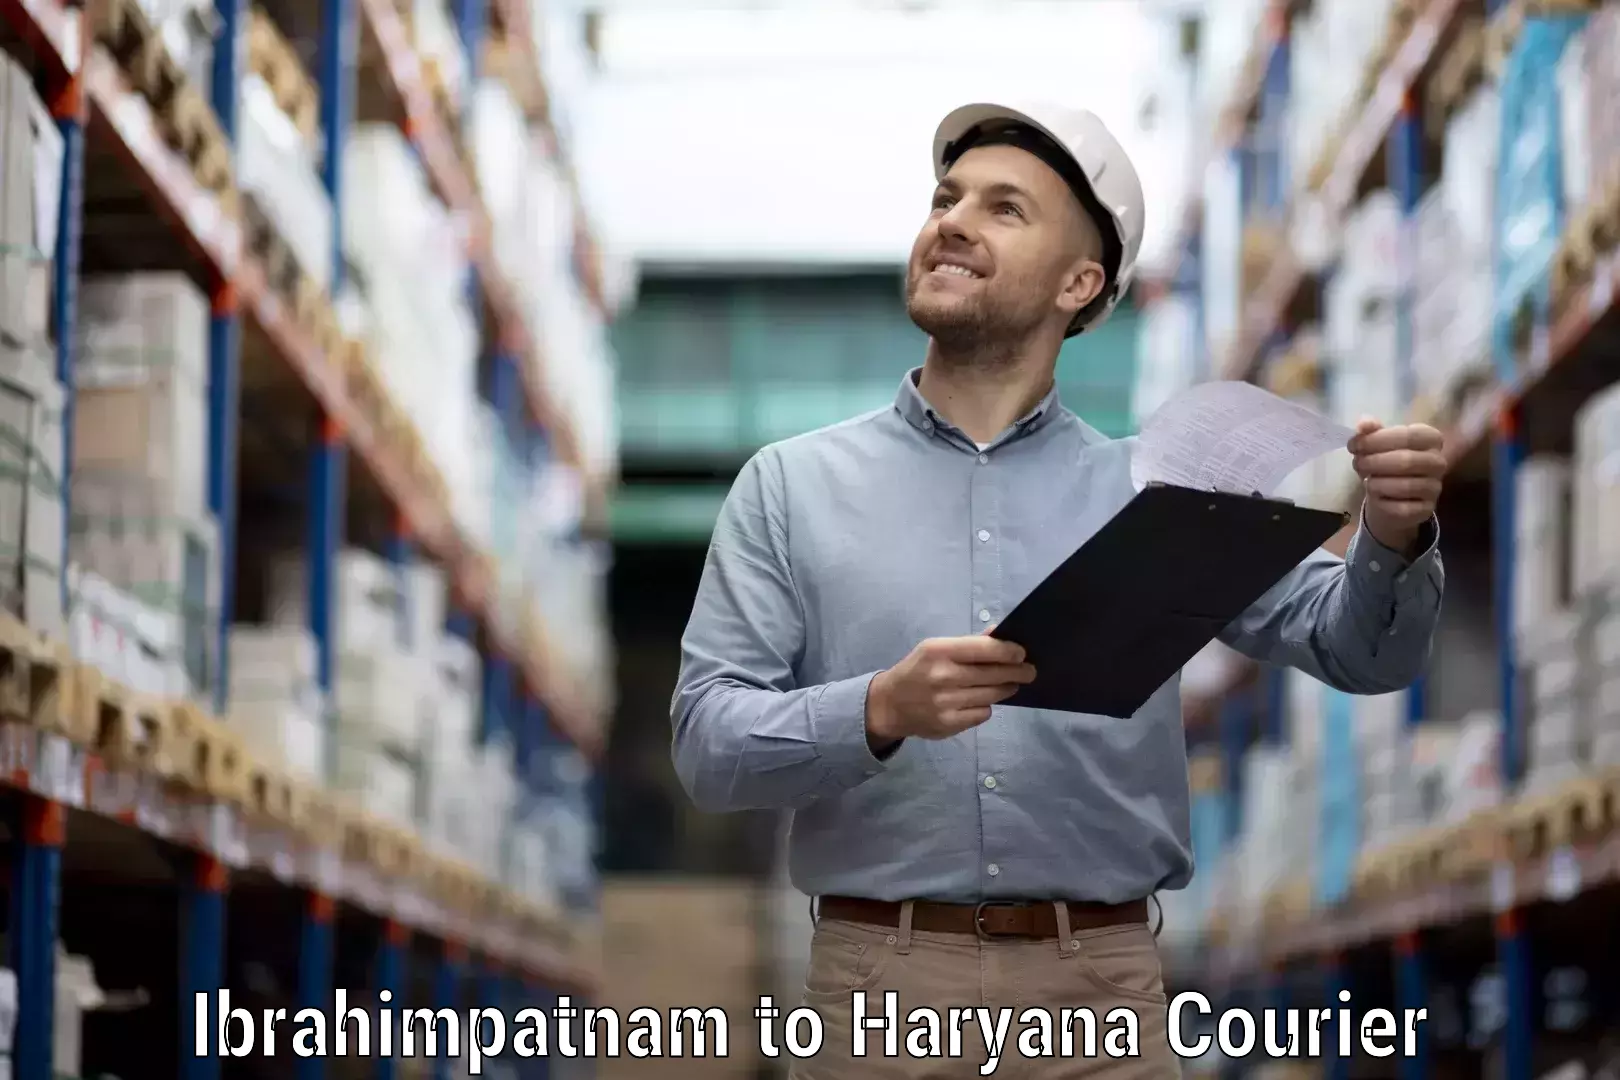 Small business couriers Ibrahimpatnam to NCR Haryana